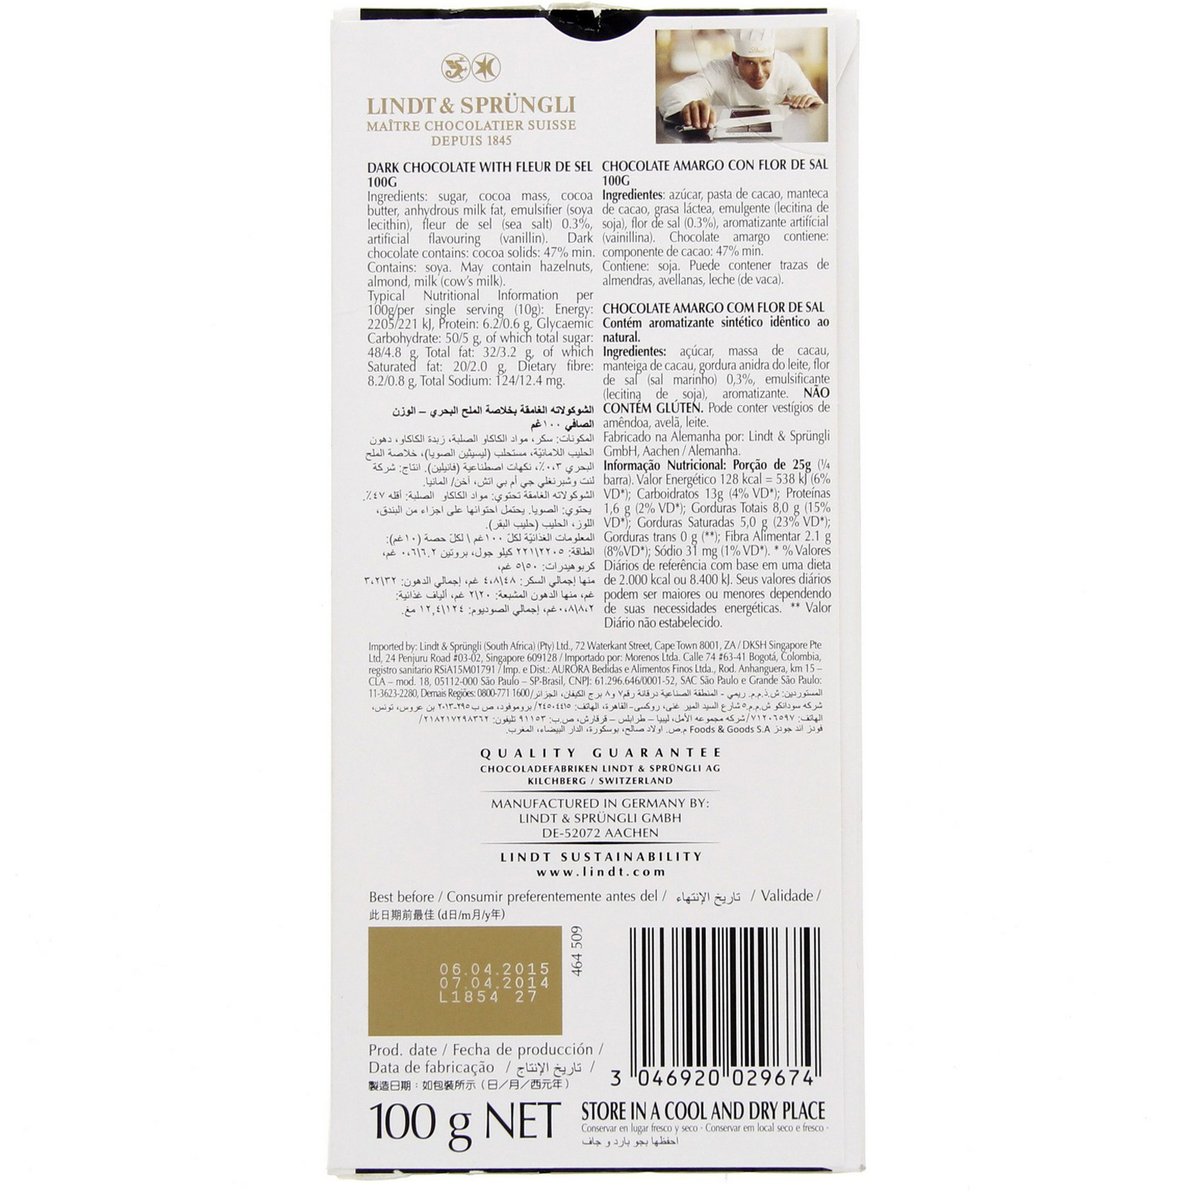 Lindt Excellence A Touch Of Sea Salt Dark Chocolate 100 g